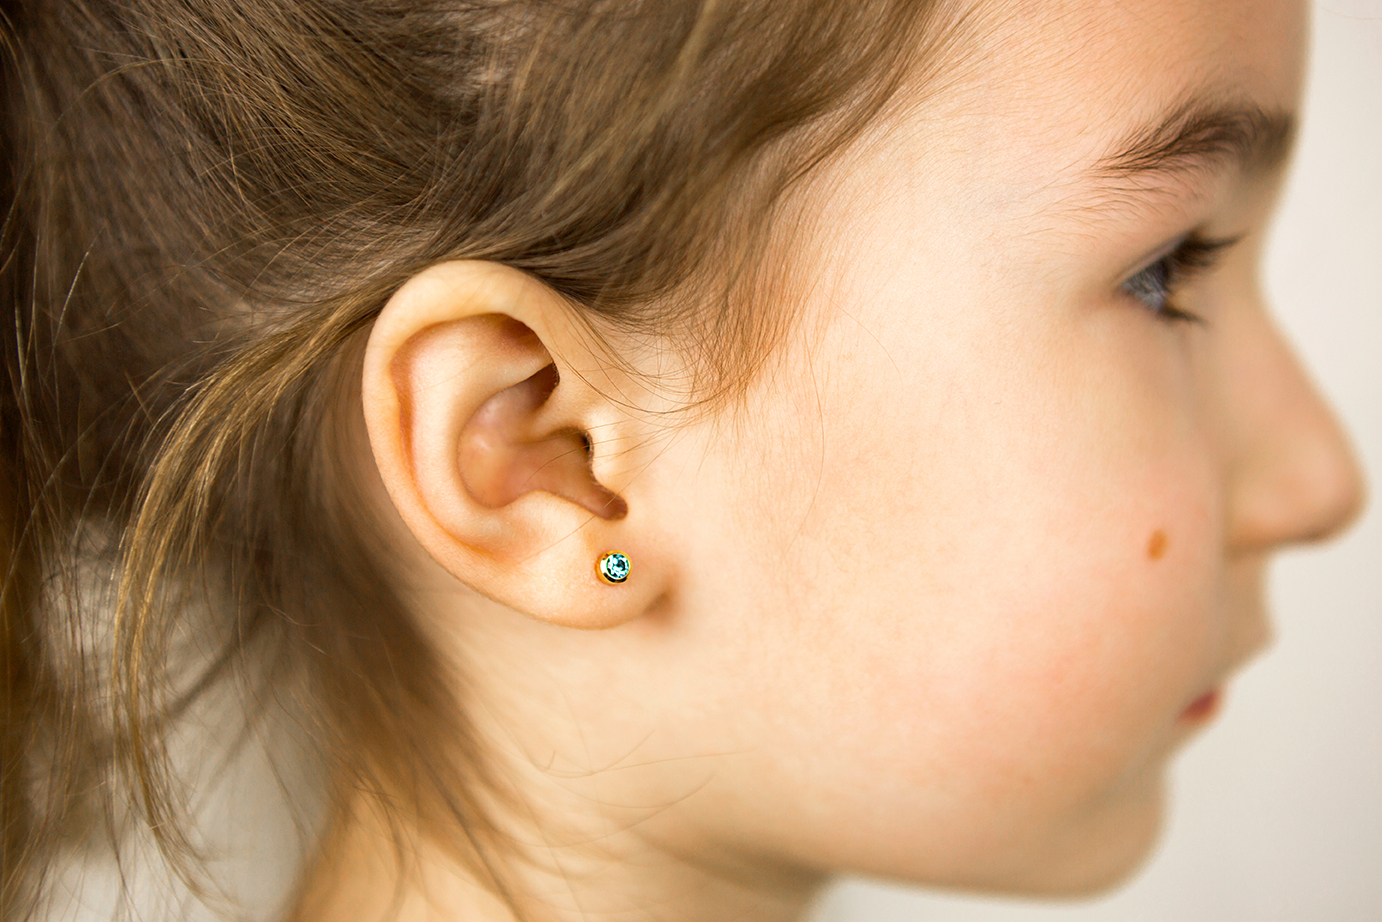 Ear piercing in a child – a girl shows an earring in her ear mad